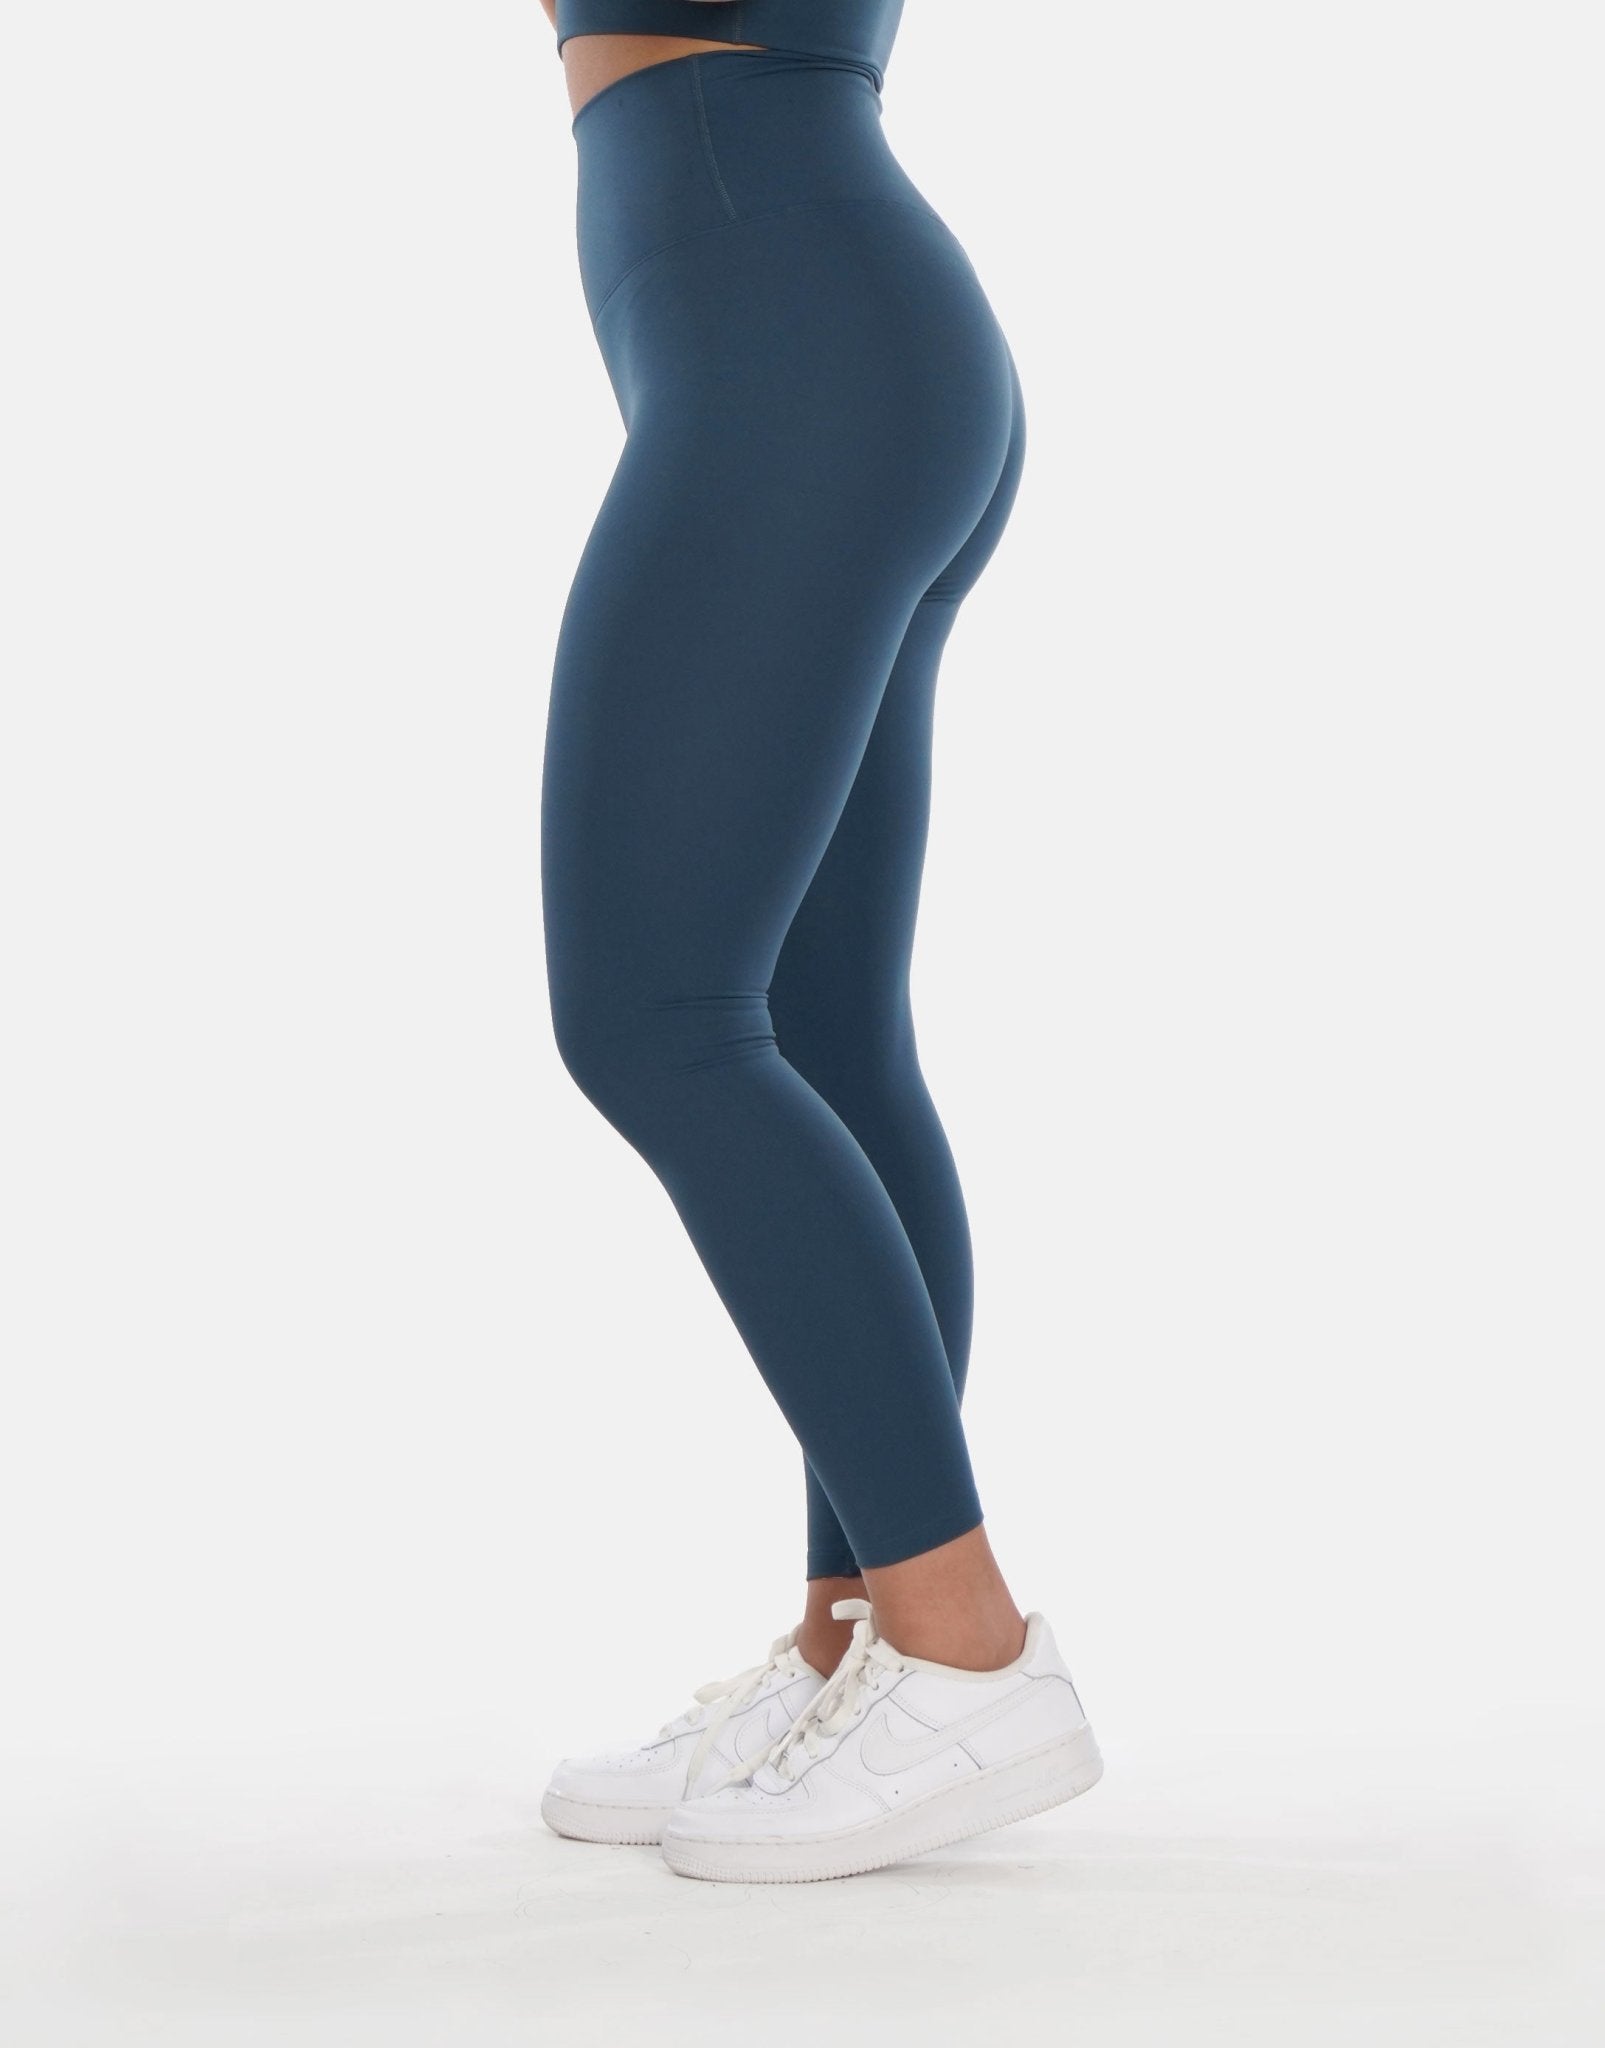 Shoppers Say They Feel Sexy and Confident in These Stretchy $9 Leggings